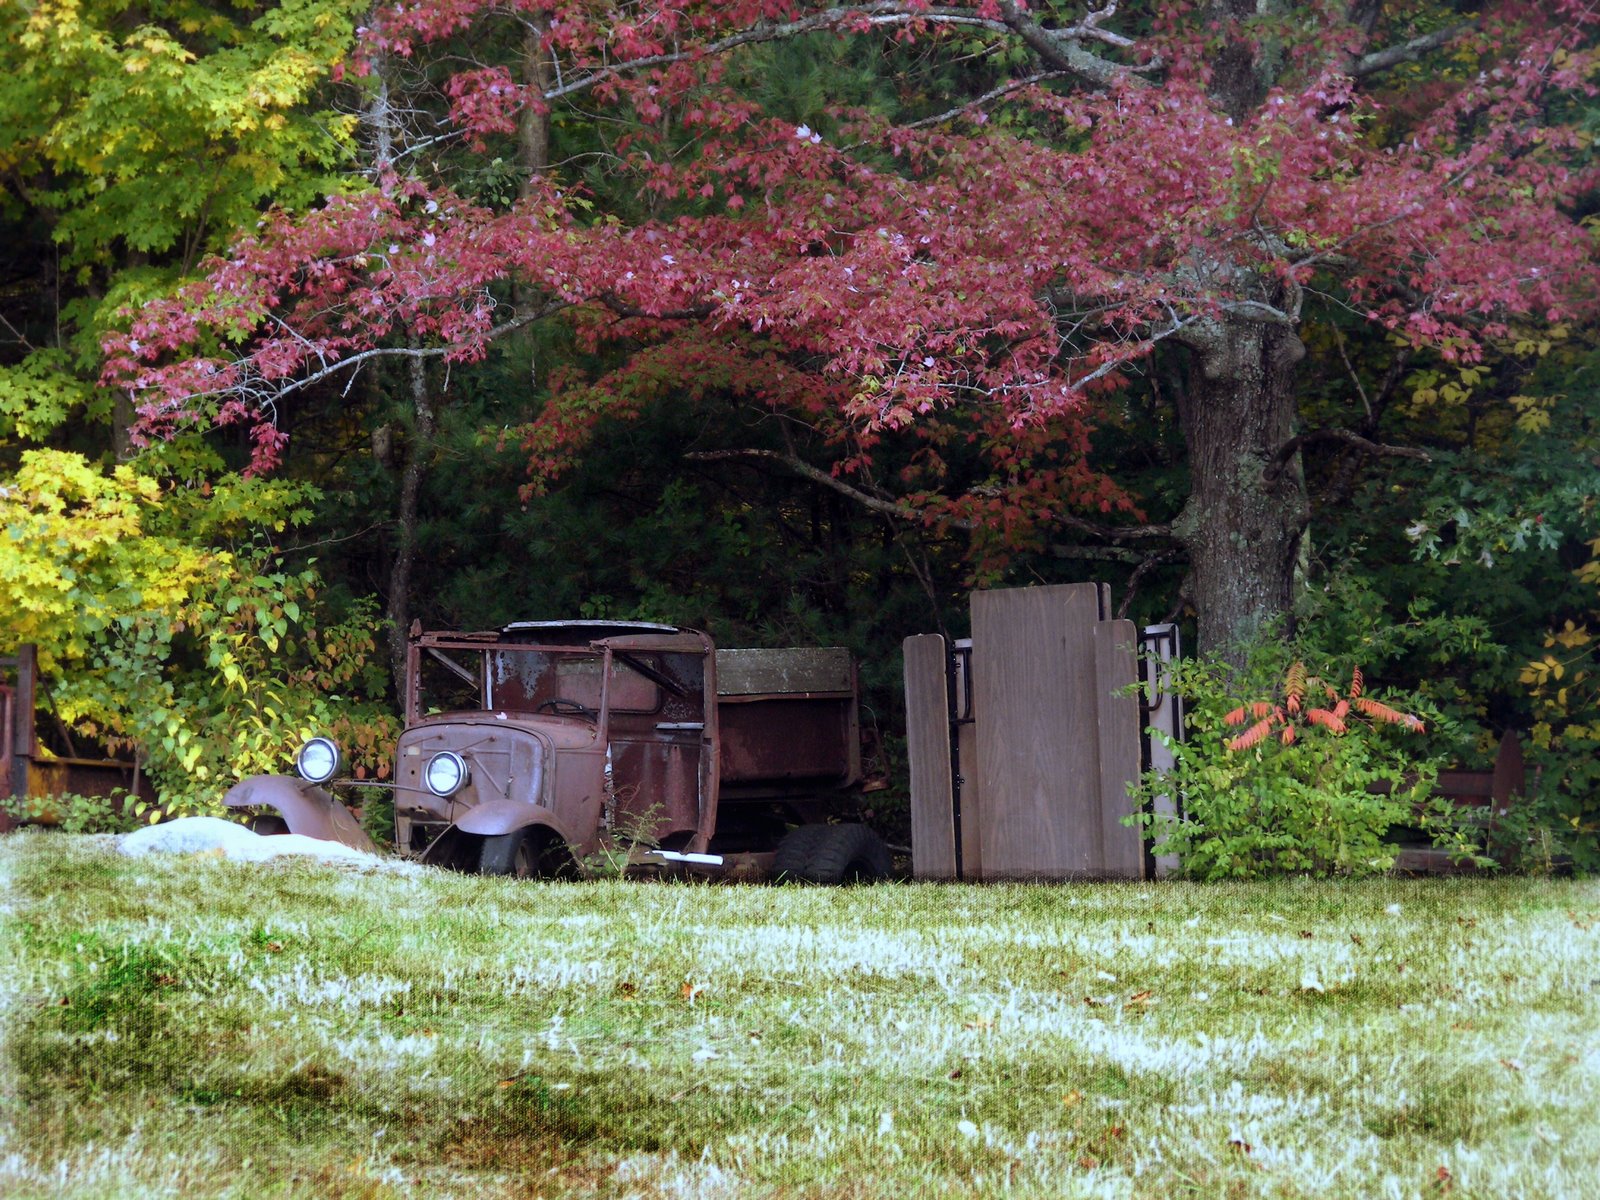 Purples Leaves: Rusted Truck (user submitted)